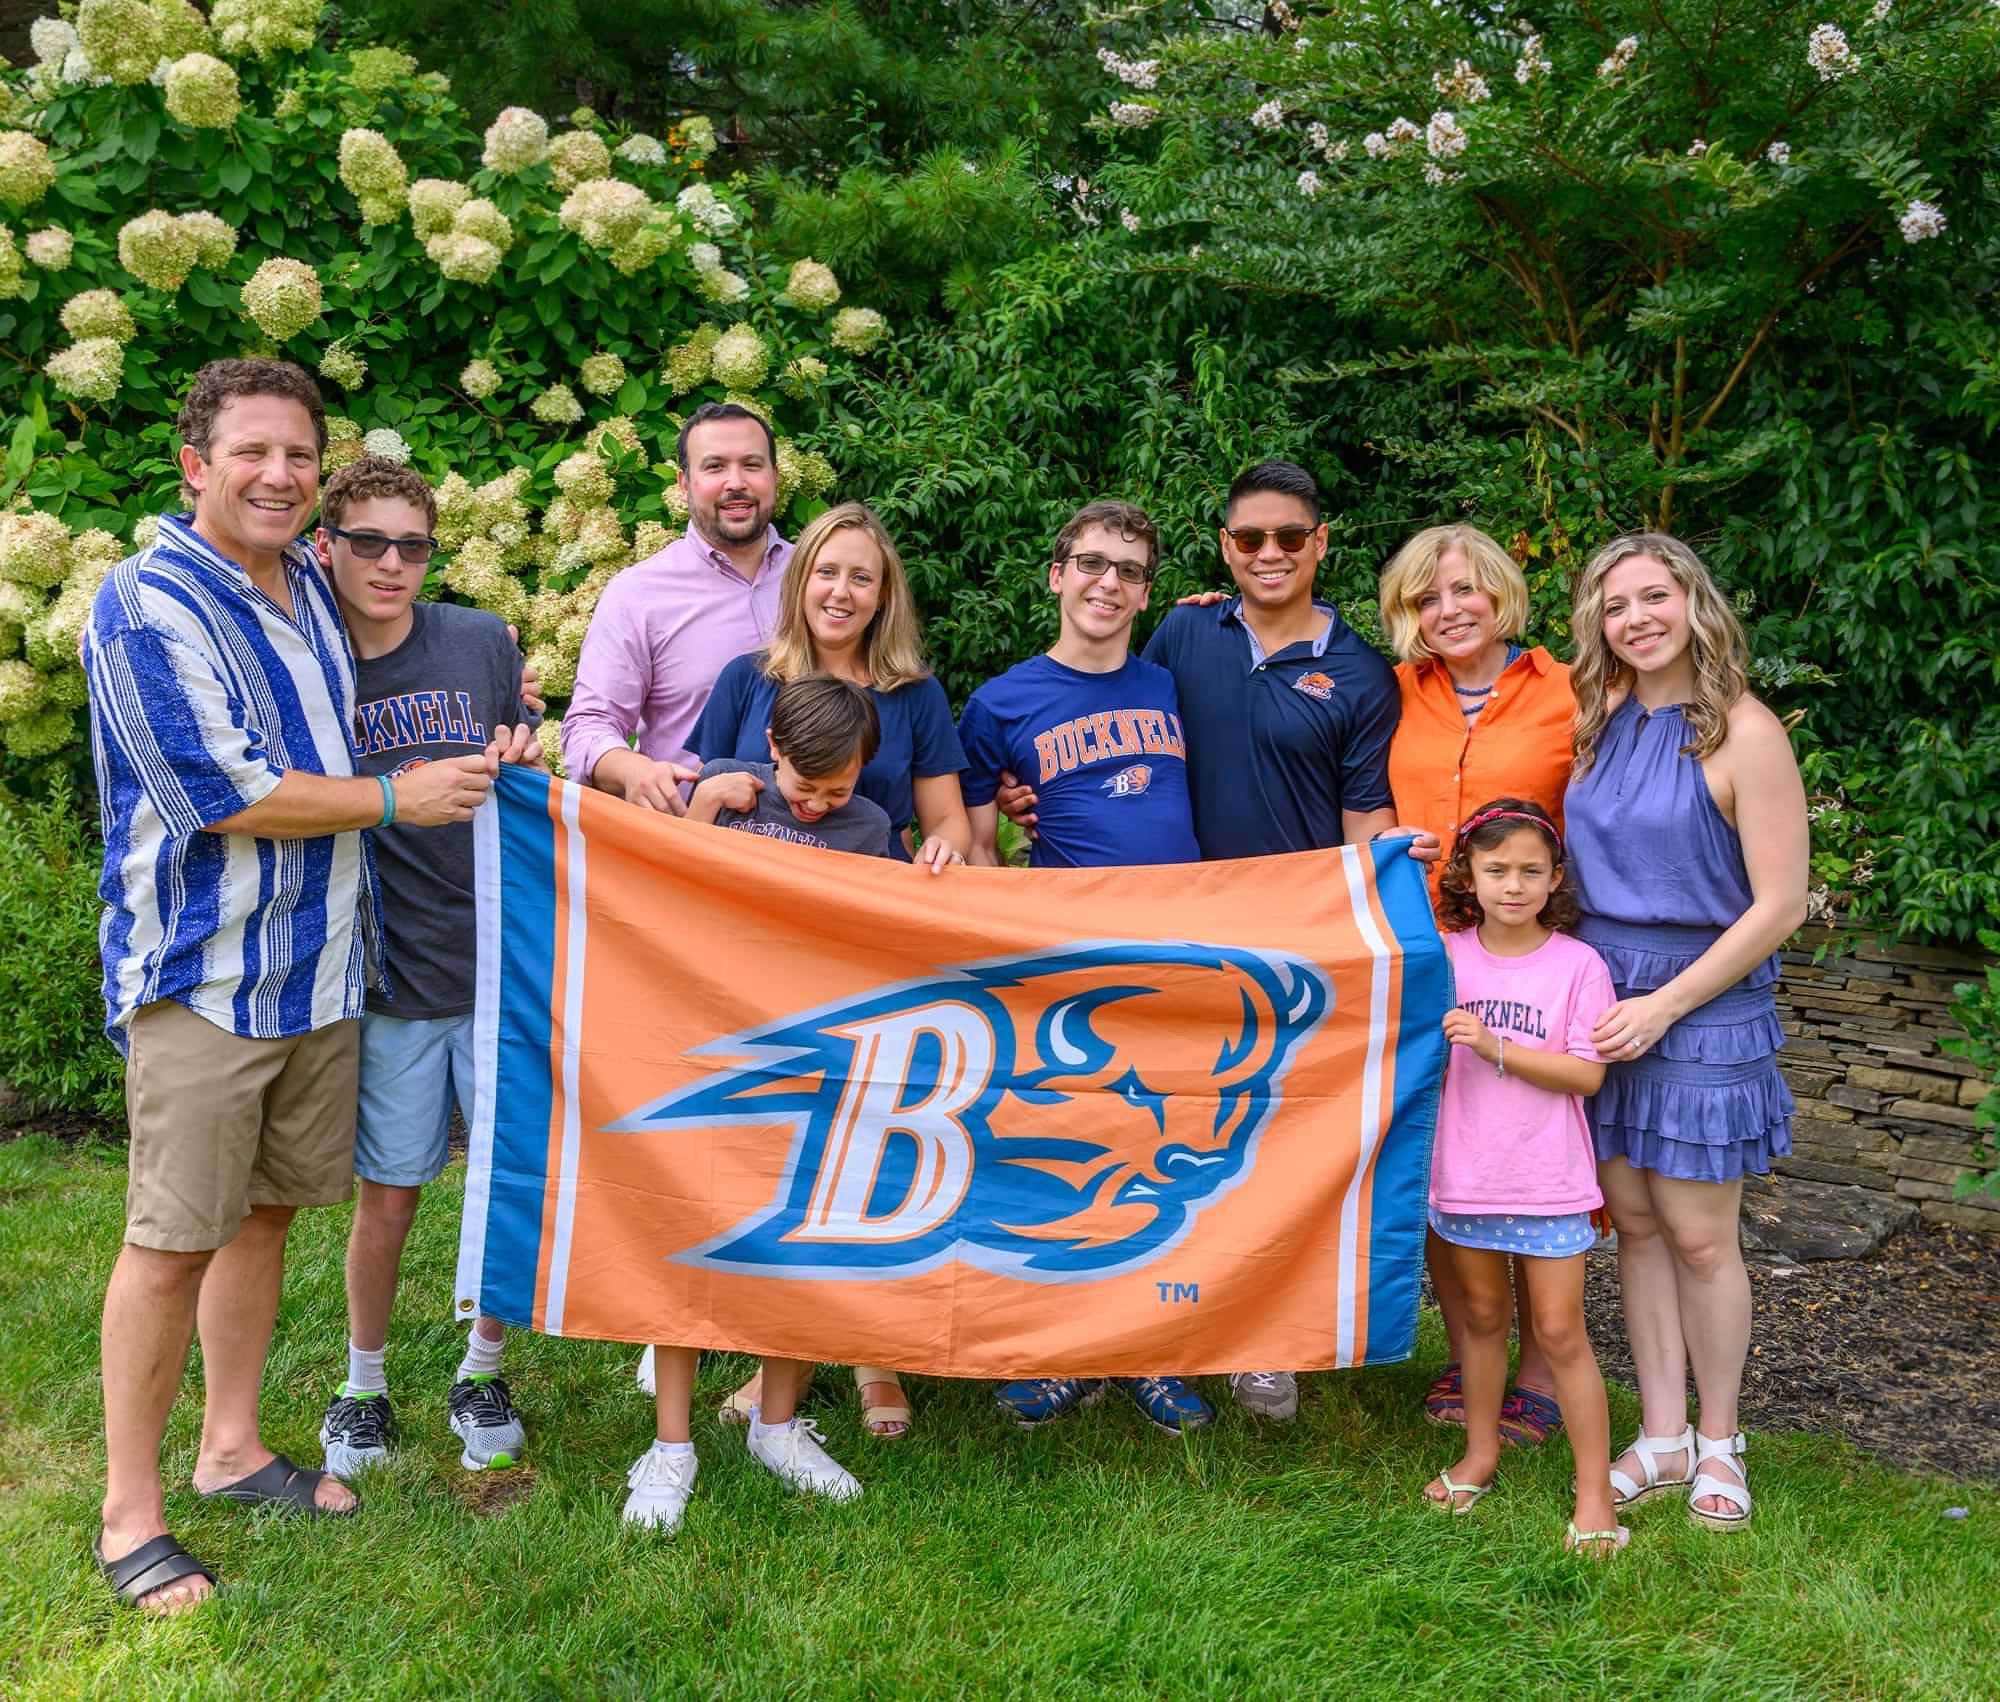 Gale and Agostini families photographed together while they all hold the Bucknell Bison flag